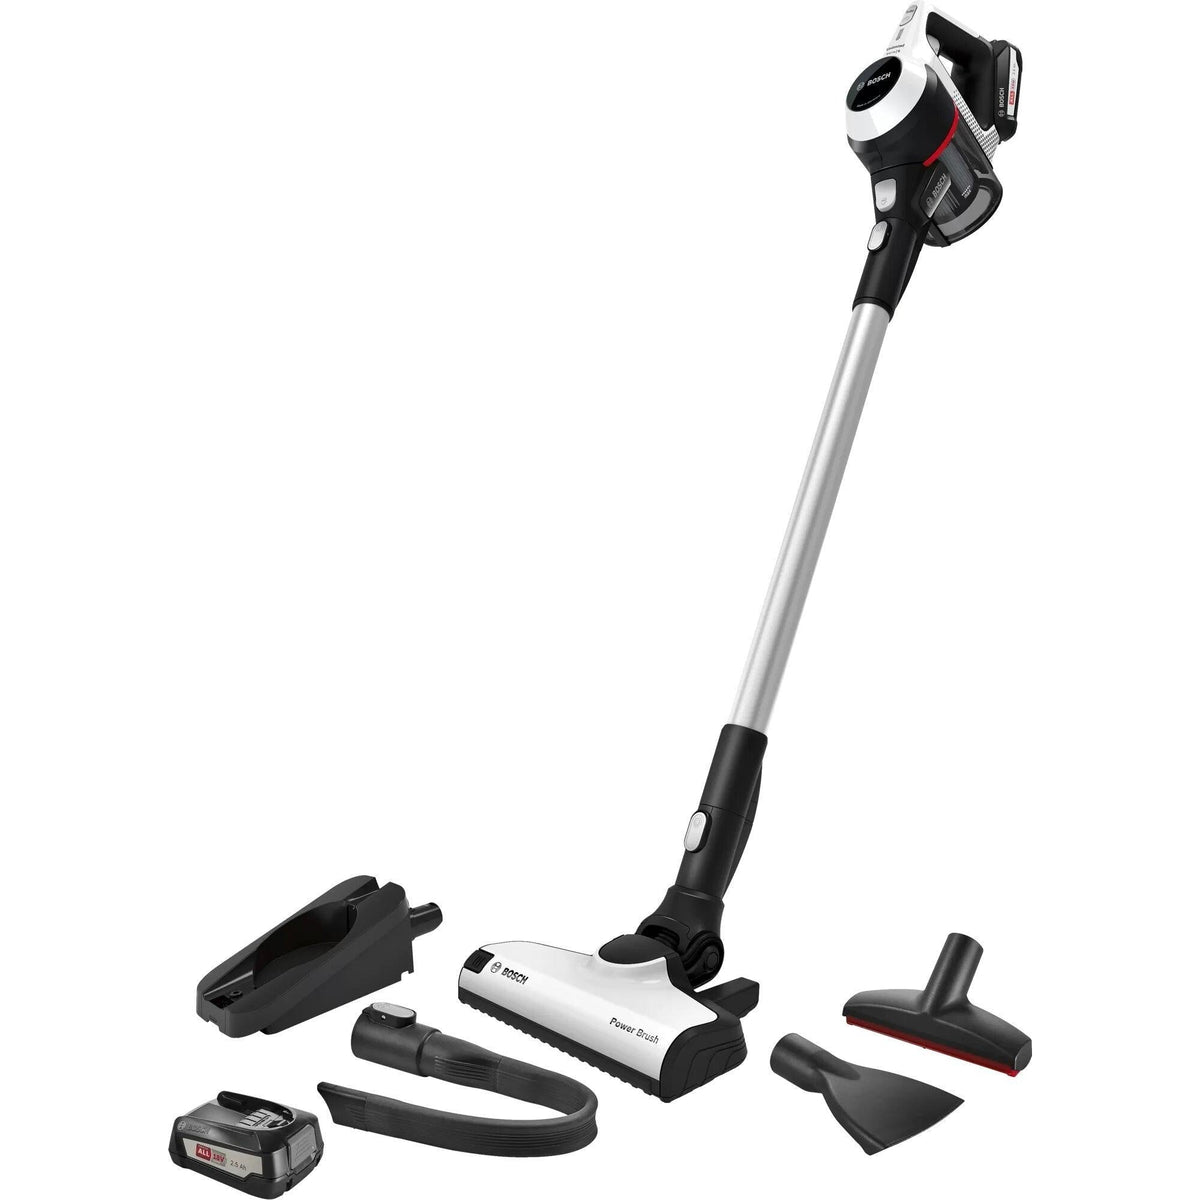 Bosch Serie 6 Rechargeable Cordless Vacuum Cleaner - White from DID Electrical - guaranteed Irish, guaranteed quality service. (6977464139964)